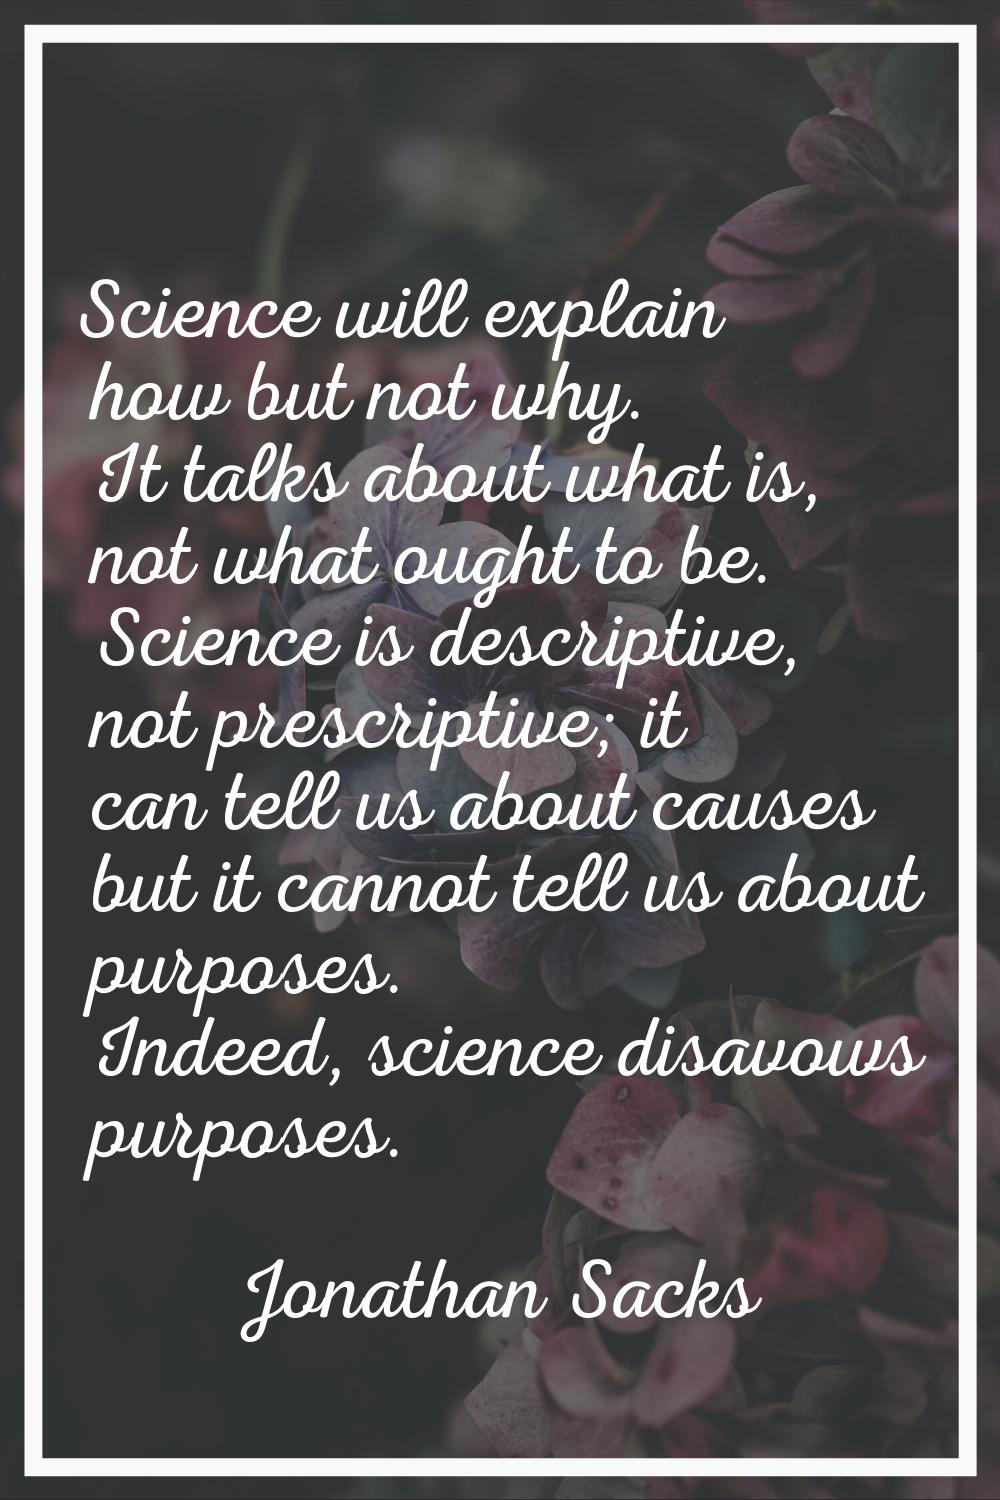 Science will explain how but not why. It talks about what is, not what ought to be. Science is desc